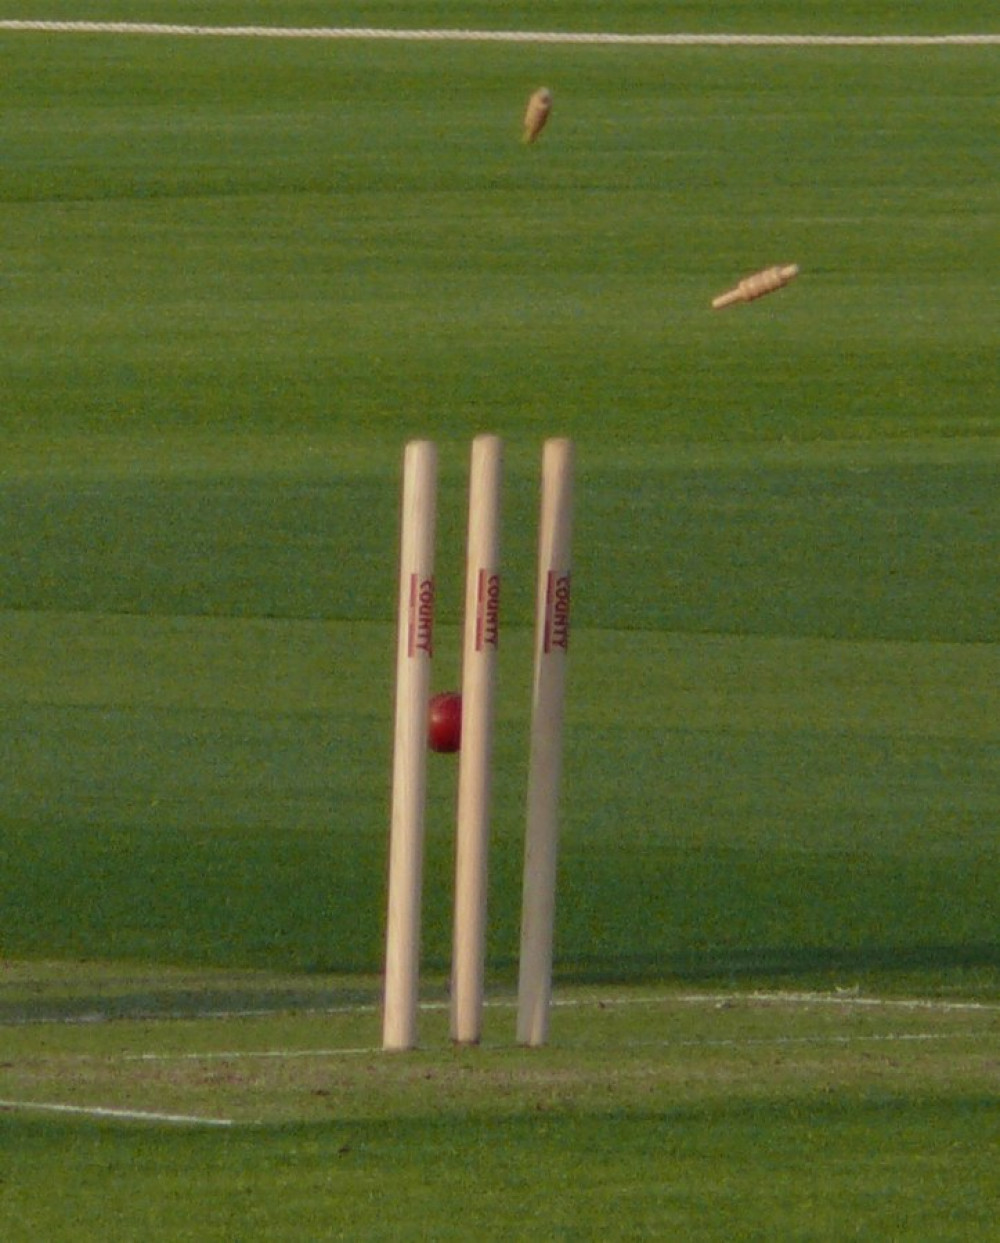 Hucknall were beaten for the first time this season. Image: ©Andrew Gray under CC BY-SA 2.0.